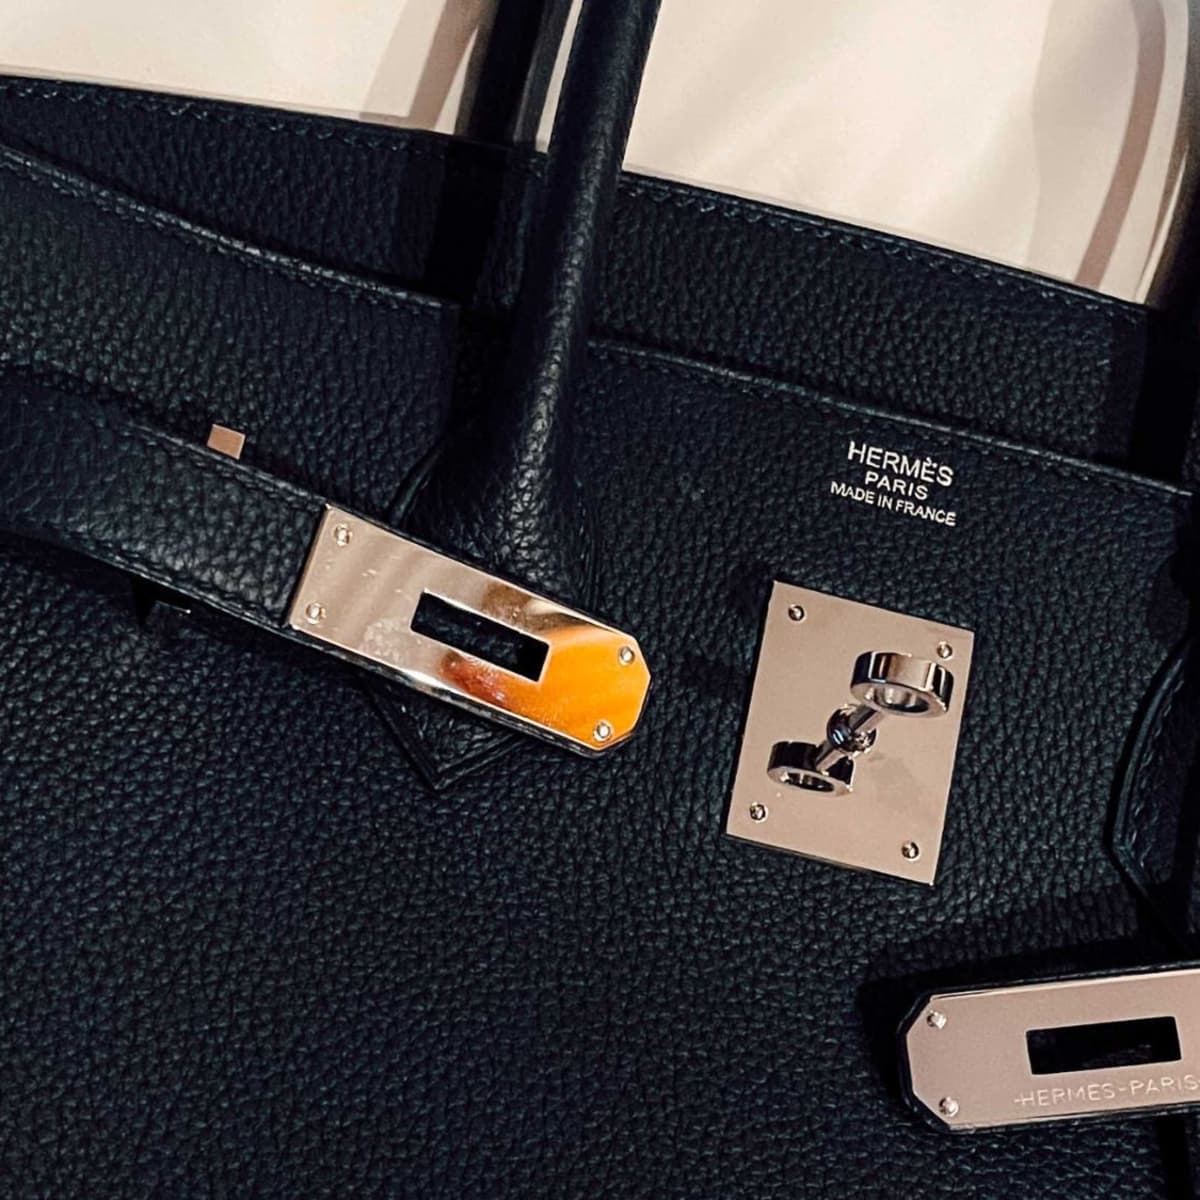 What You Need to Know Before Buying a Hermès Evelyne Bag